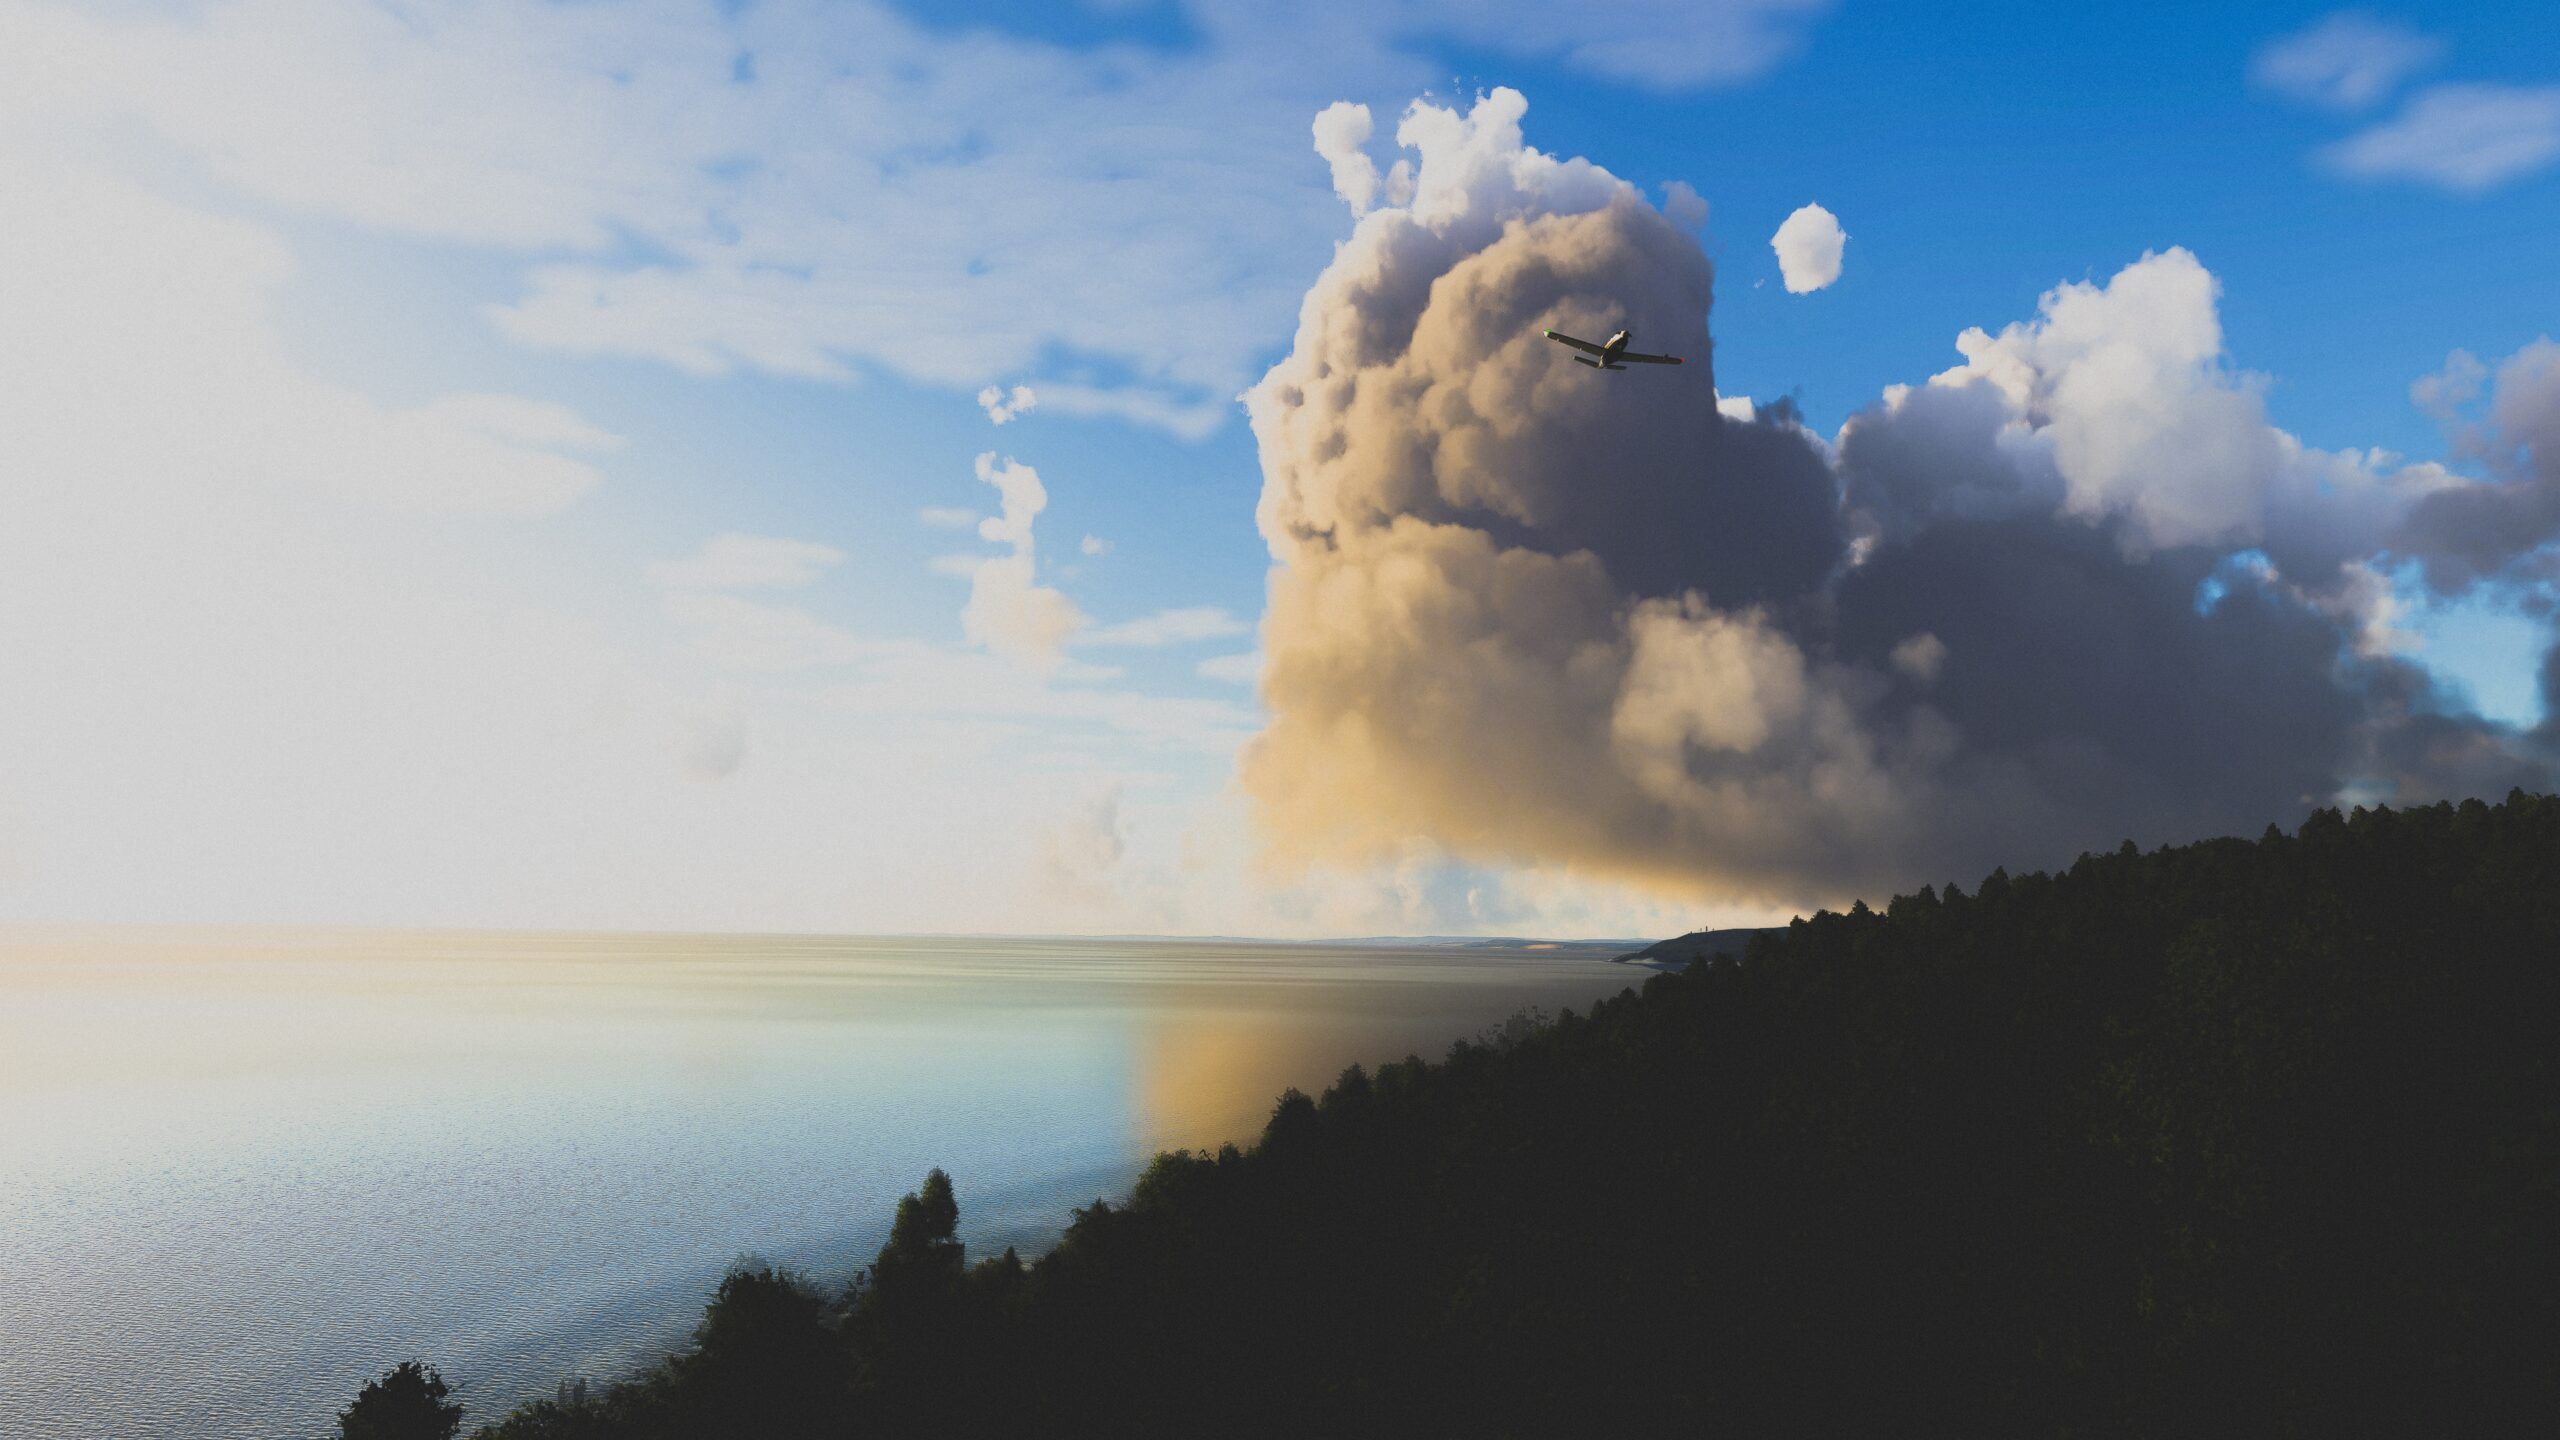 Microsoft Flight Simulator plane flying in front of giant cloud by cliffs and trees